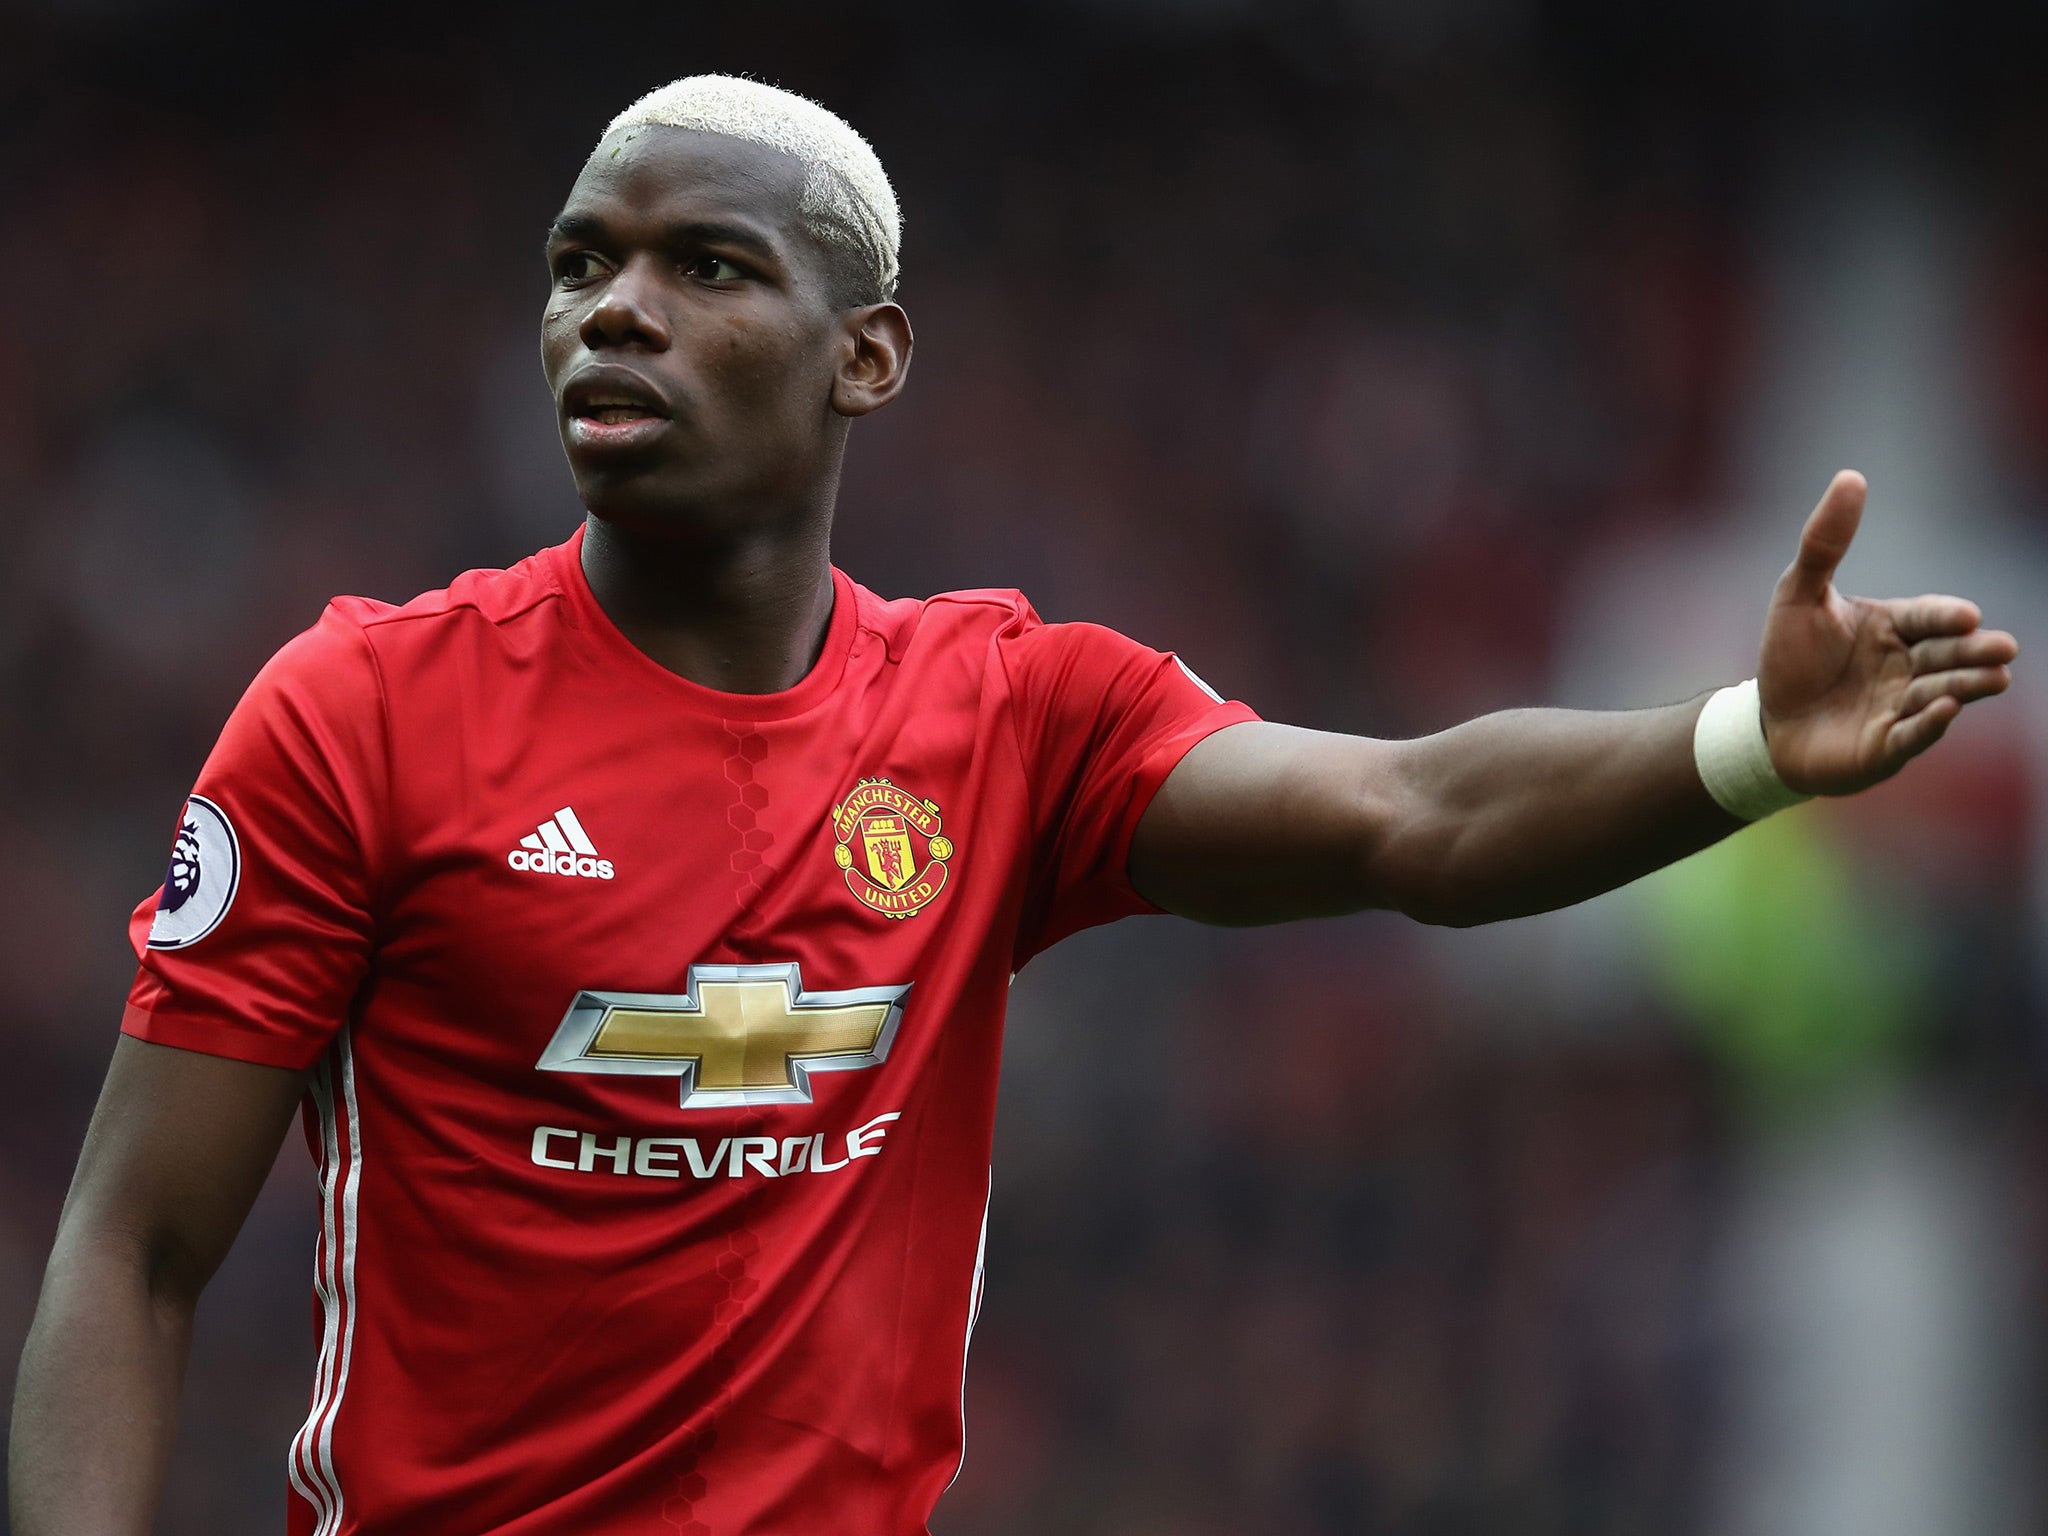 Paul Pogba is yet to have a signature game in a Manchester United shirt